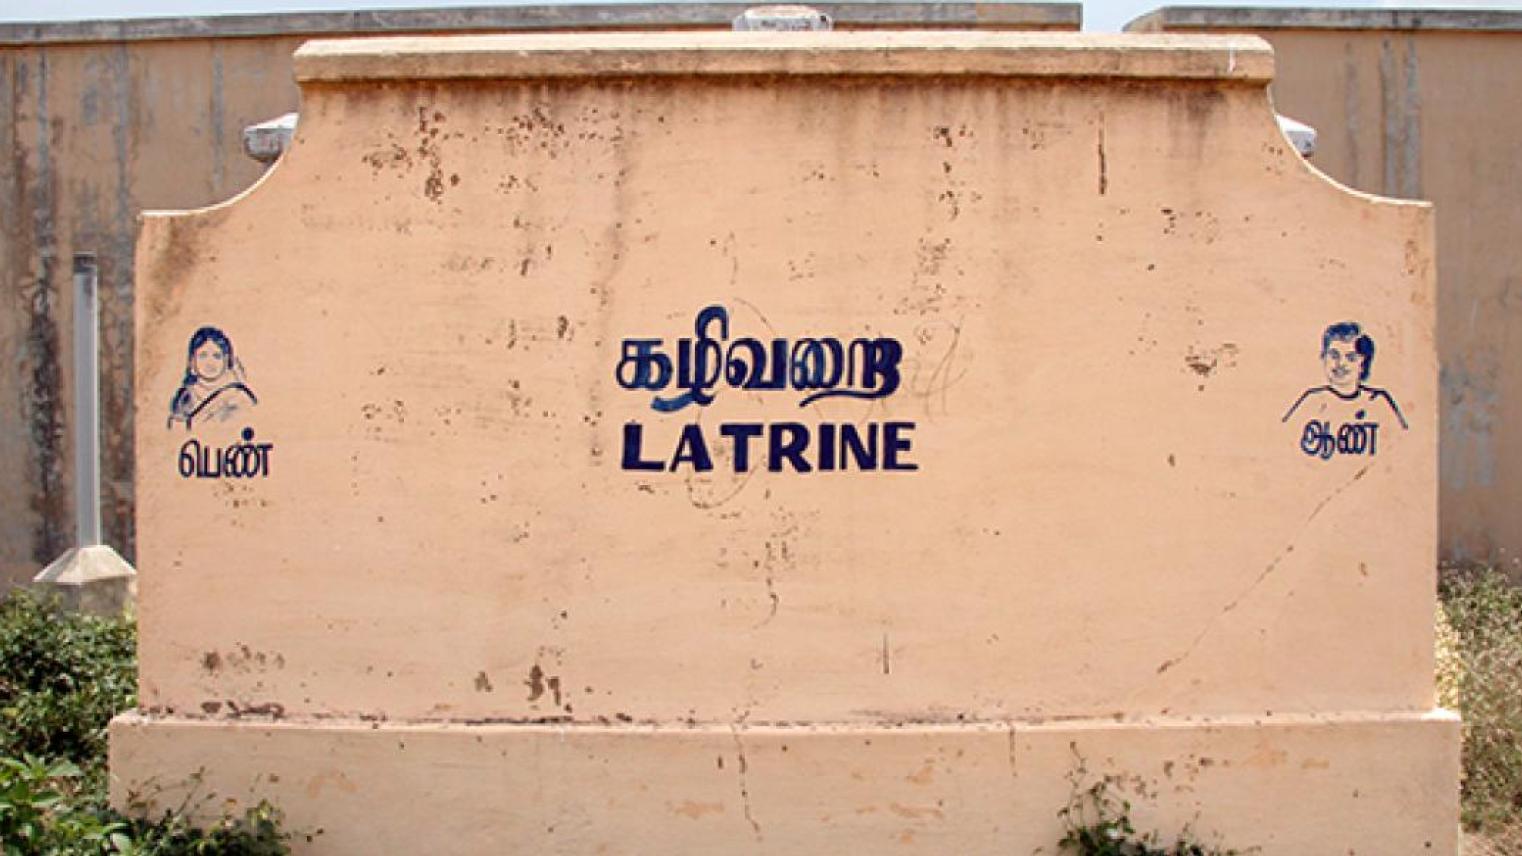 Outside wall of a concrete toilet building with Latrine written on the side